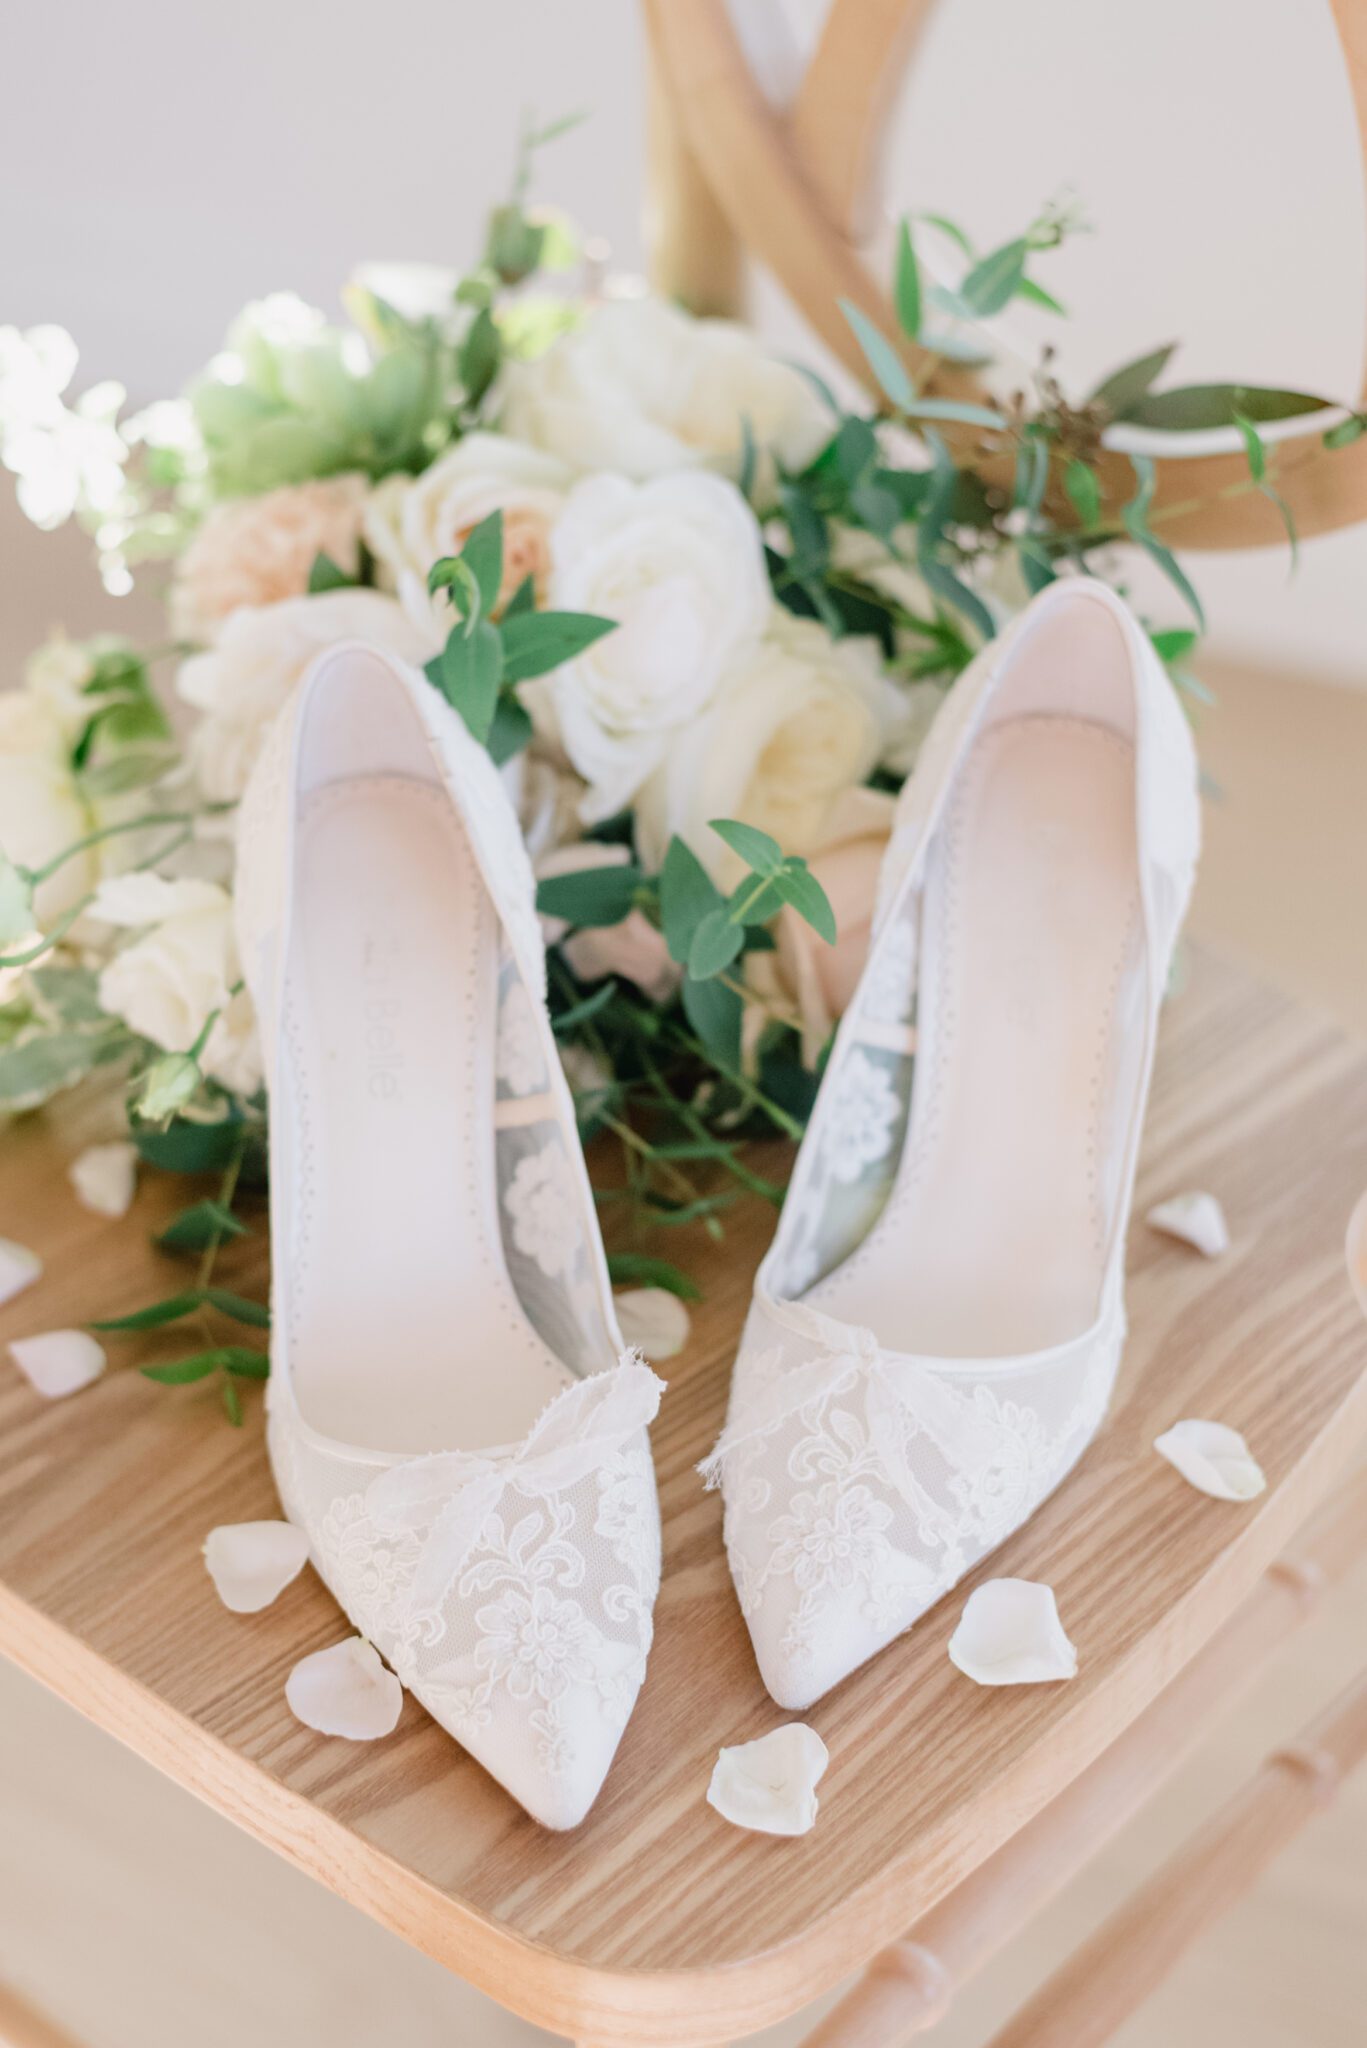 Sophisticated cottage core inspired bridal details. Lace bridal shoes by Bella Belle Shoes, styled with lush pale yellow, ivory, white, and green florals.